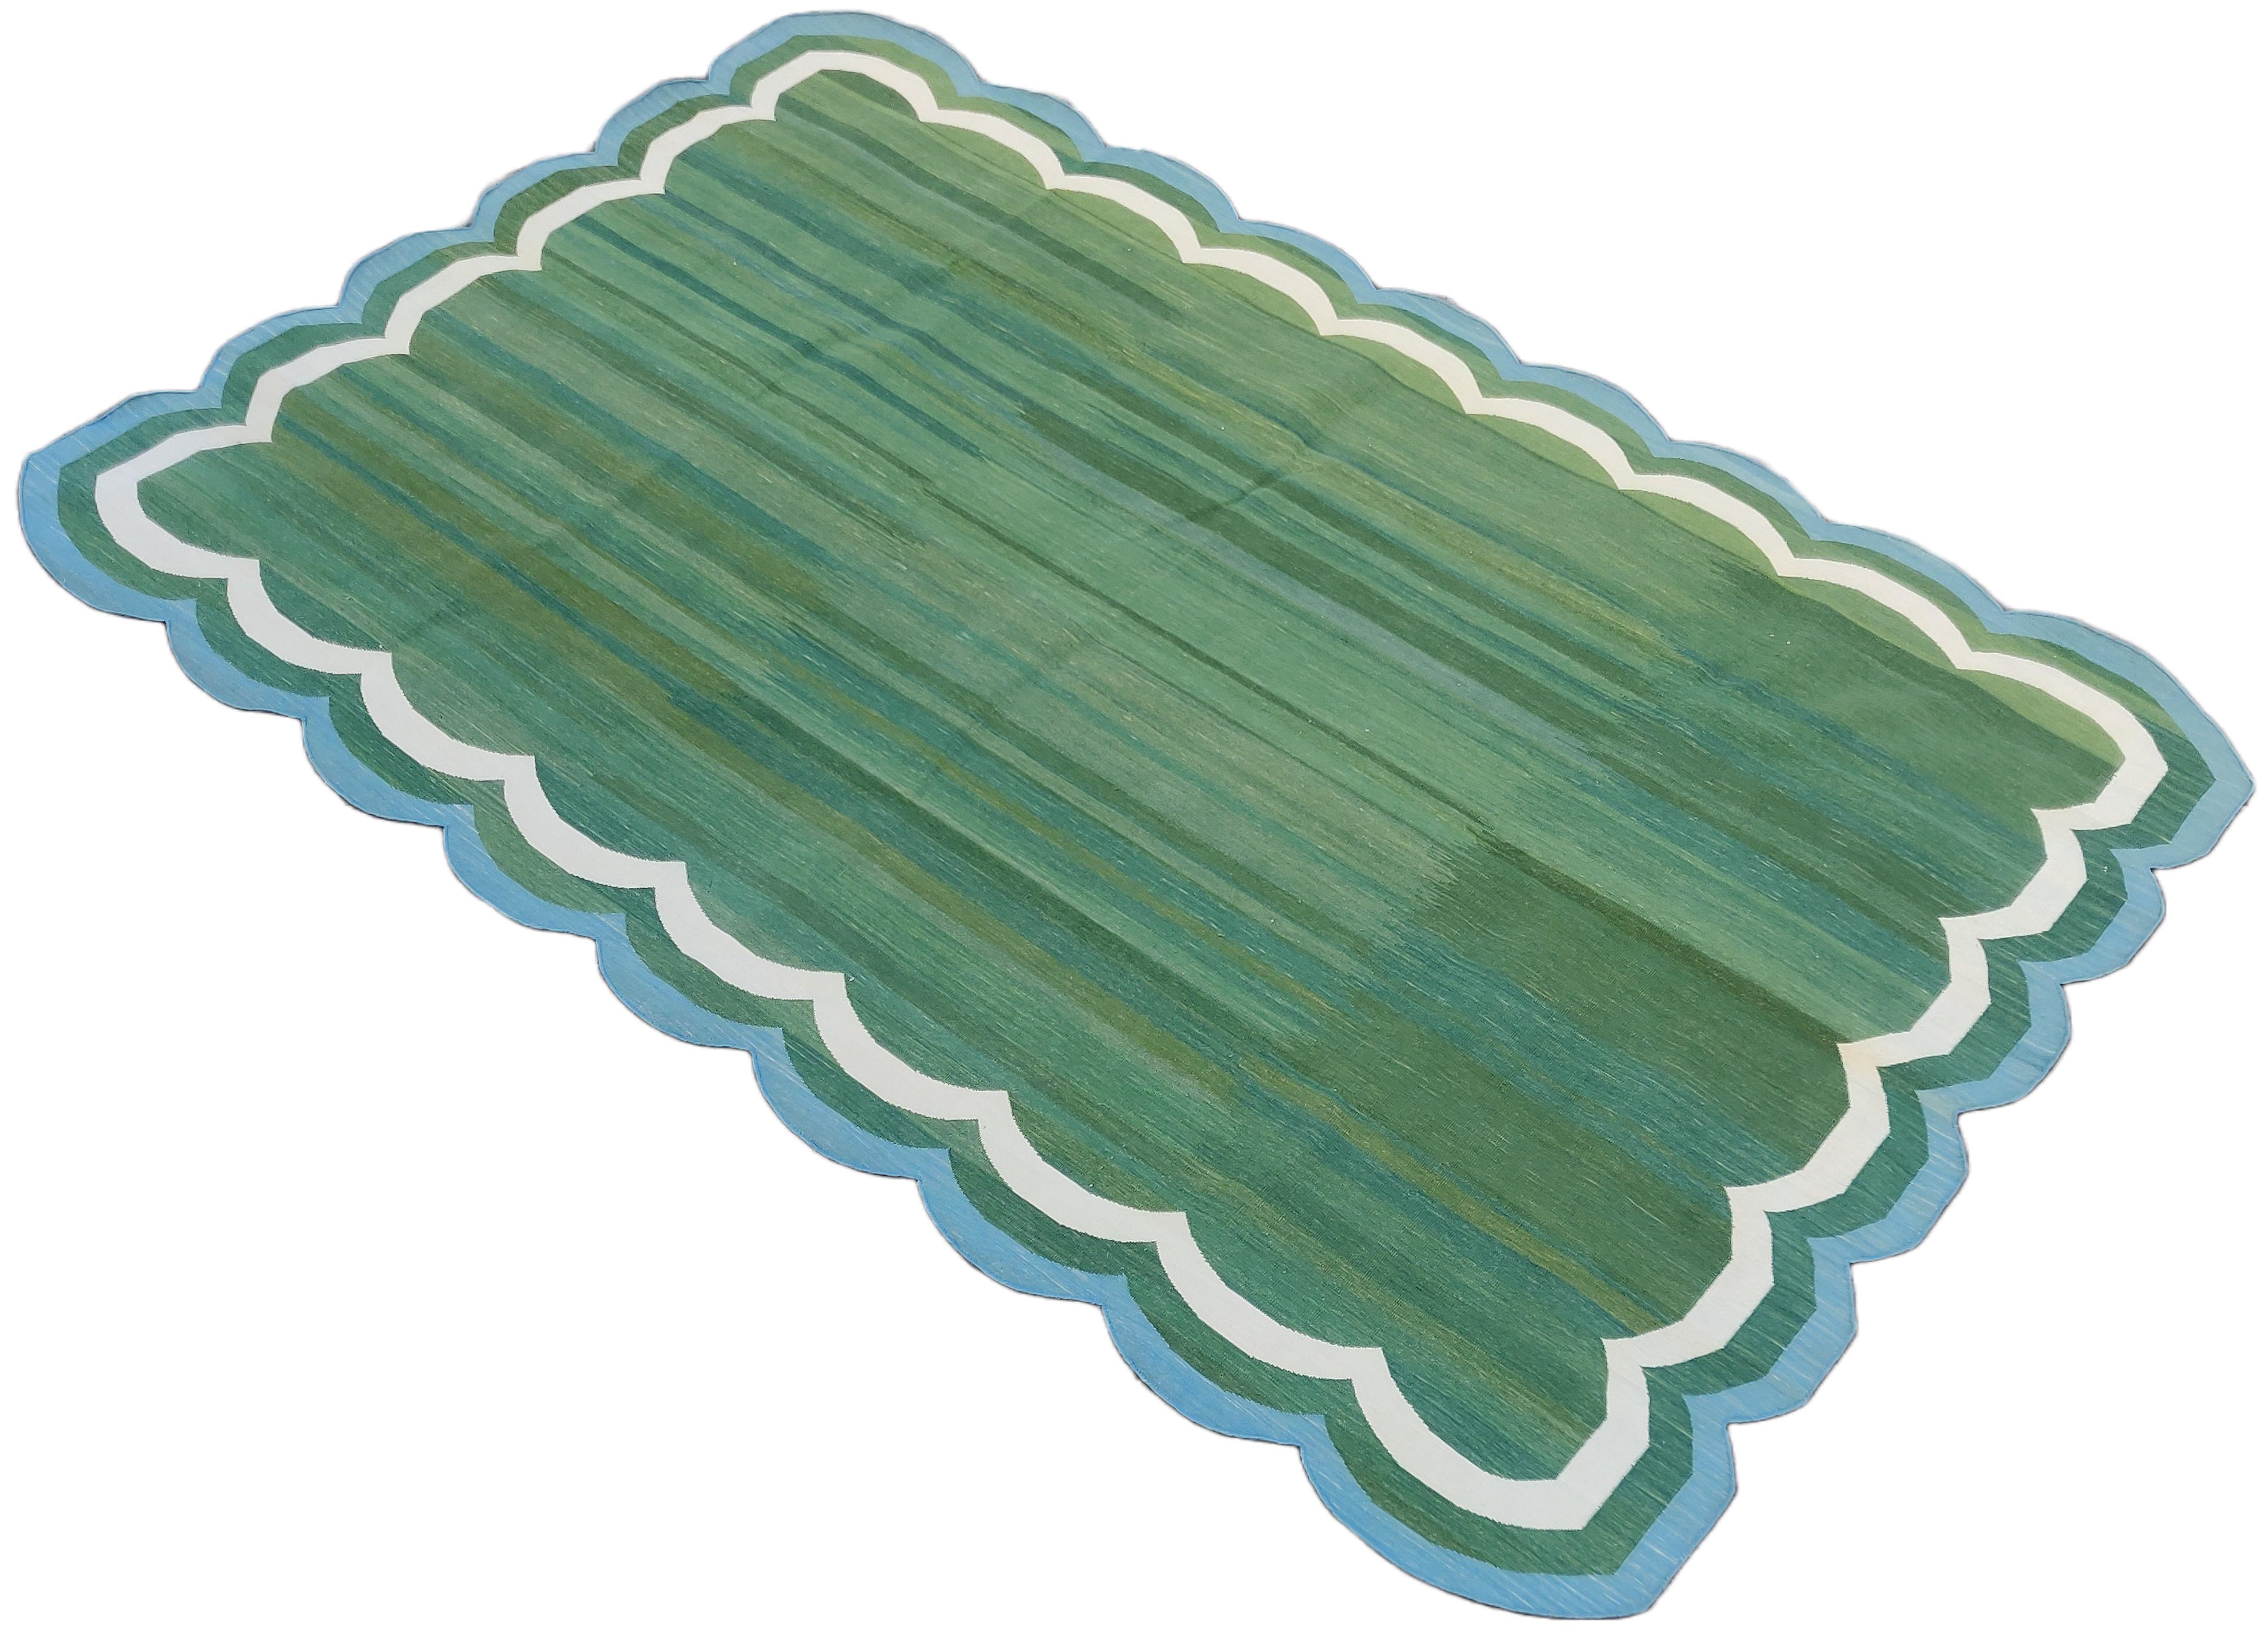 Cotton Vegetable Dyed Forest Green And Blue Four Sided Scalloped Rug-6'x9'
These special flat-weave dhurries are hand-woven with 15 ply 100% cotton yarn. Due to the special manufacturing techniques used to create our rugs, the size and color of each